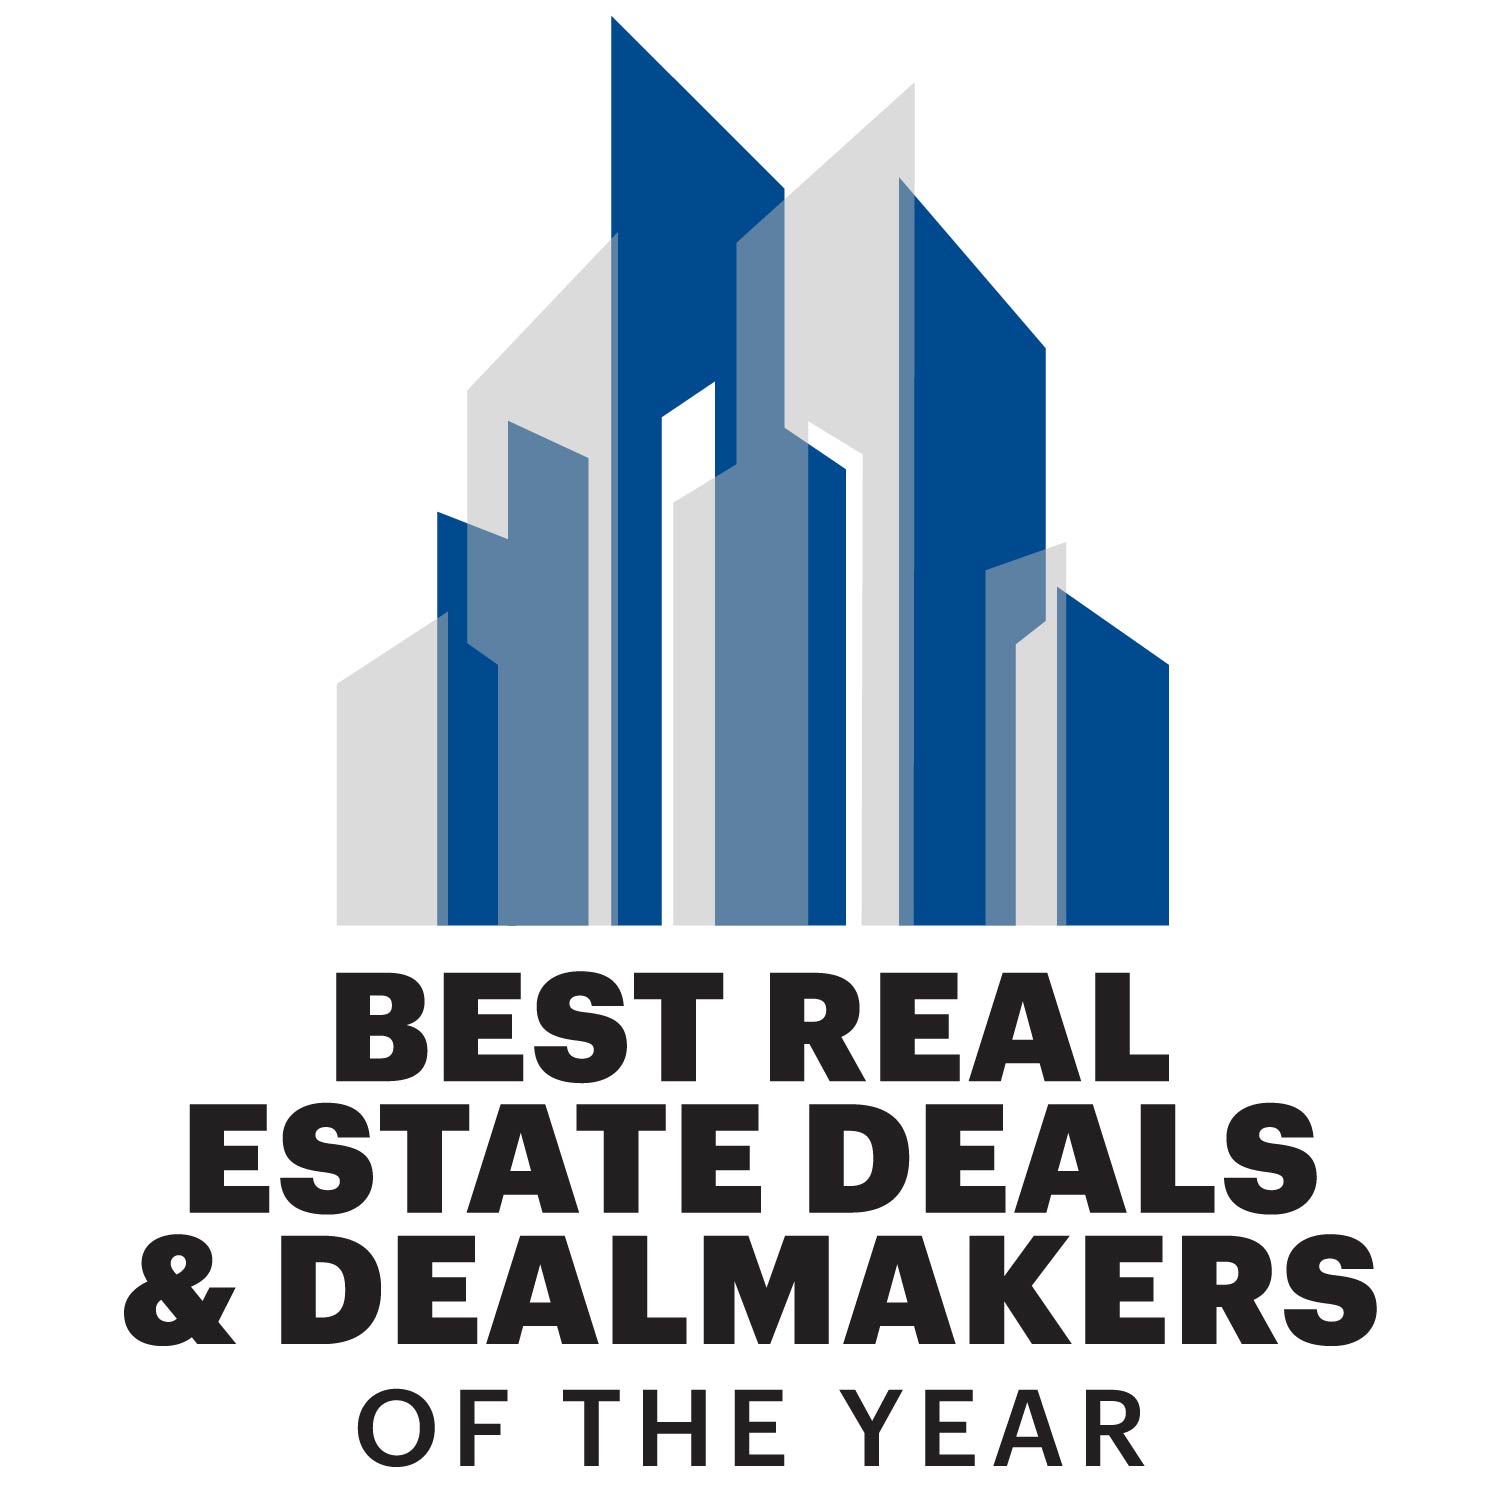 Mallin’s Deal at 5th & Spring Garden Among Deal of the Year Winners